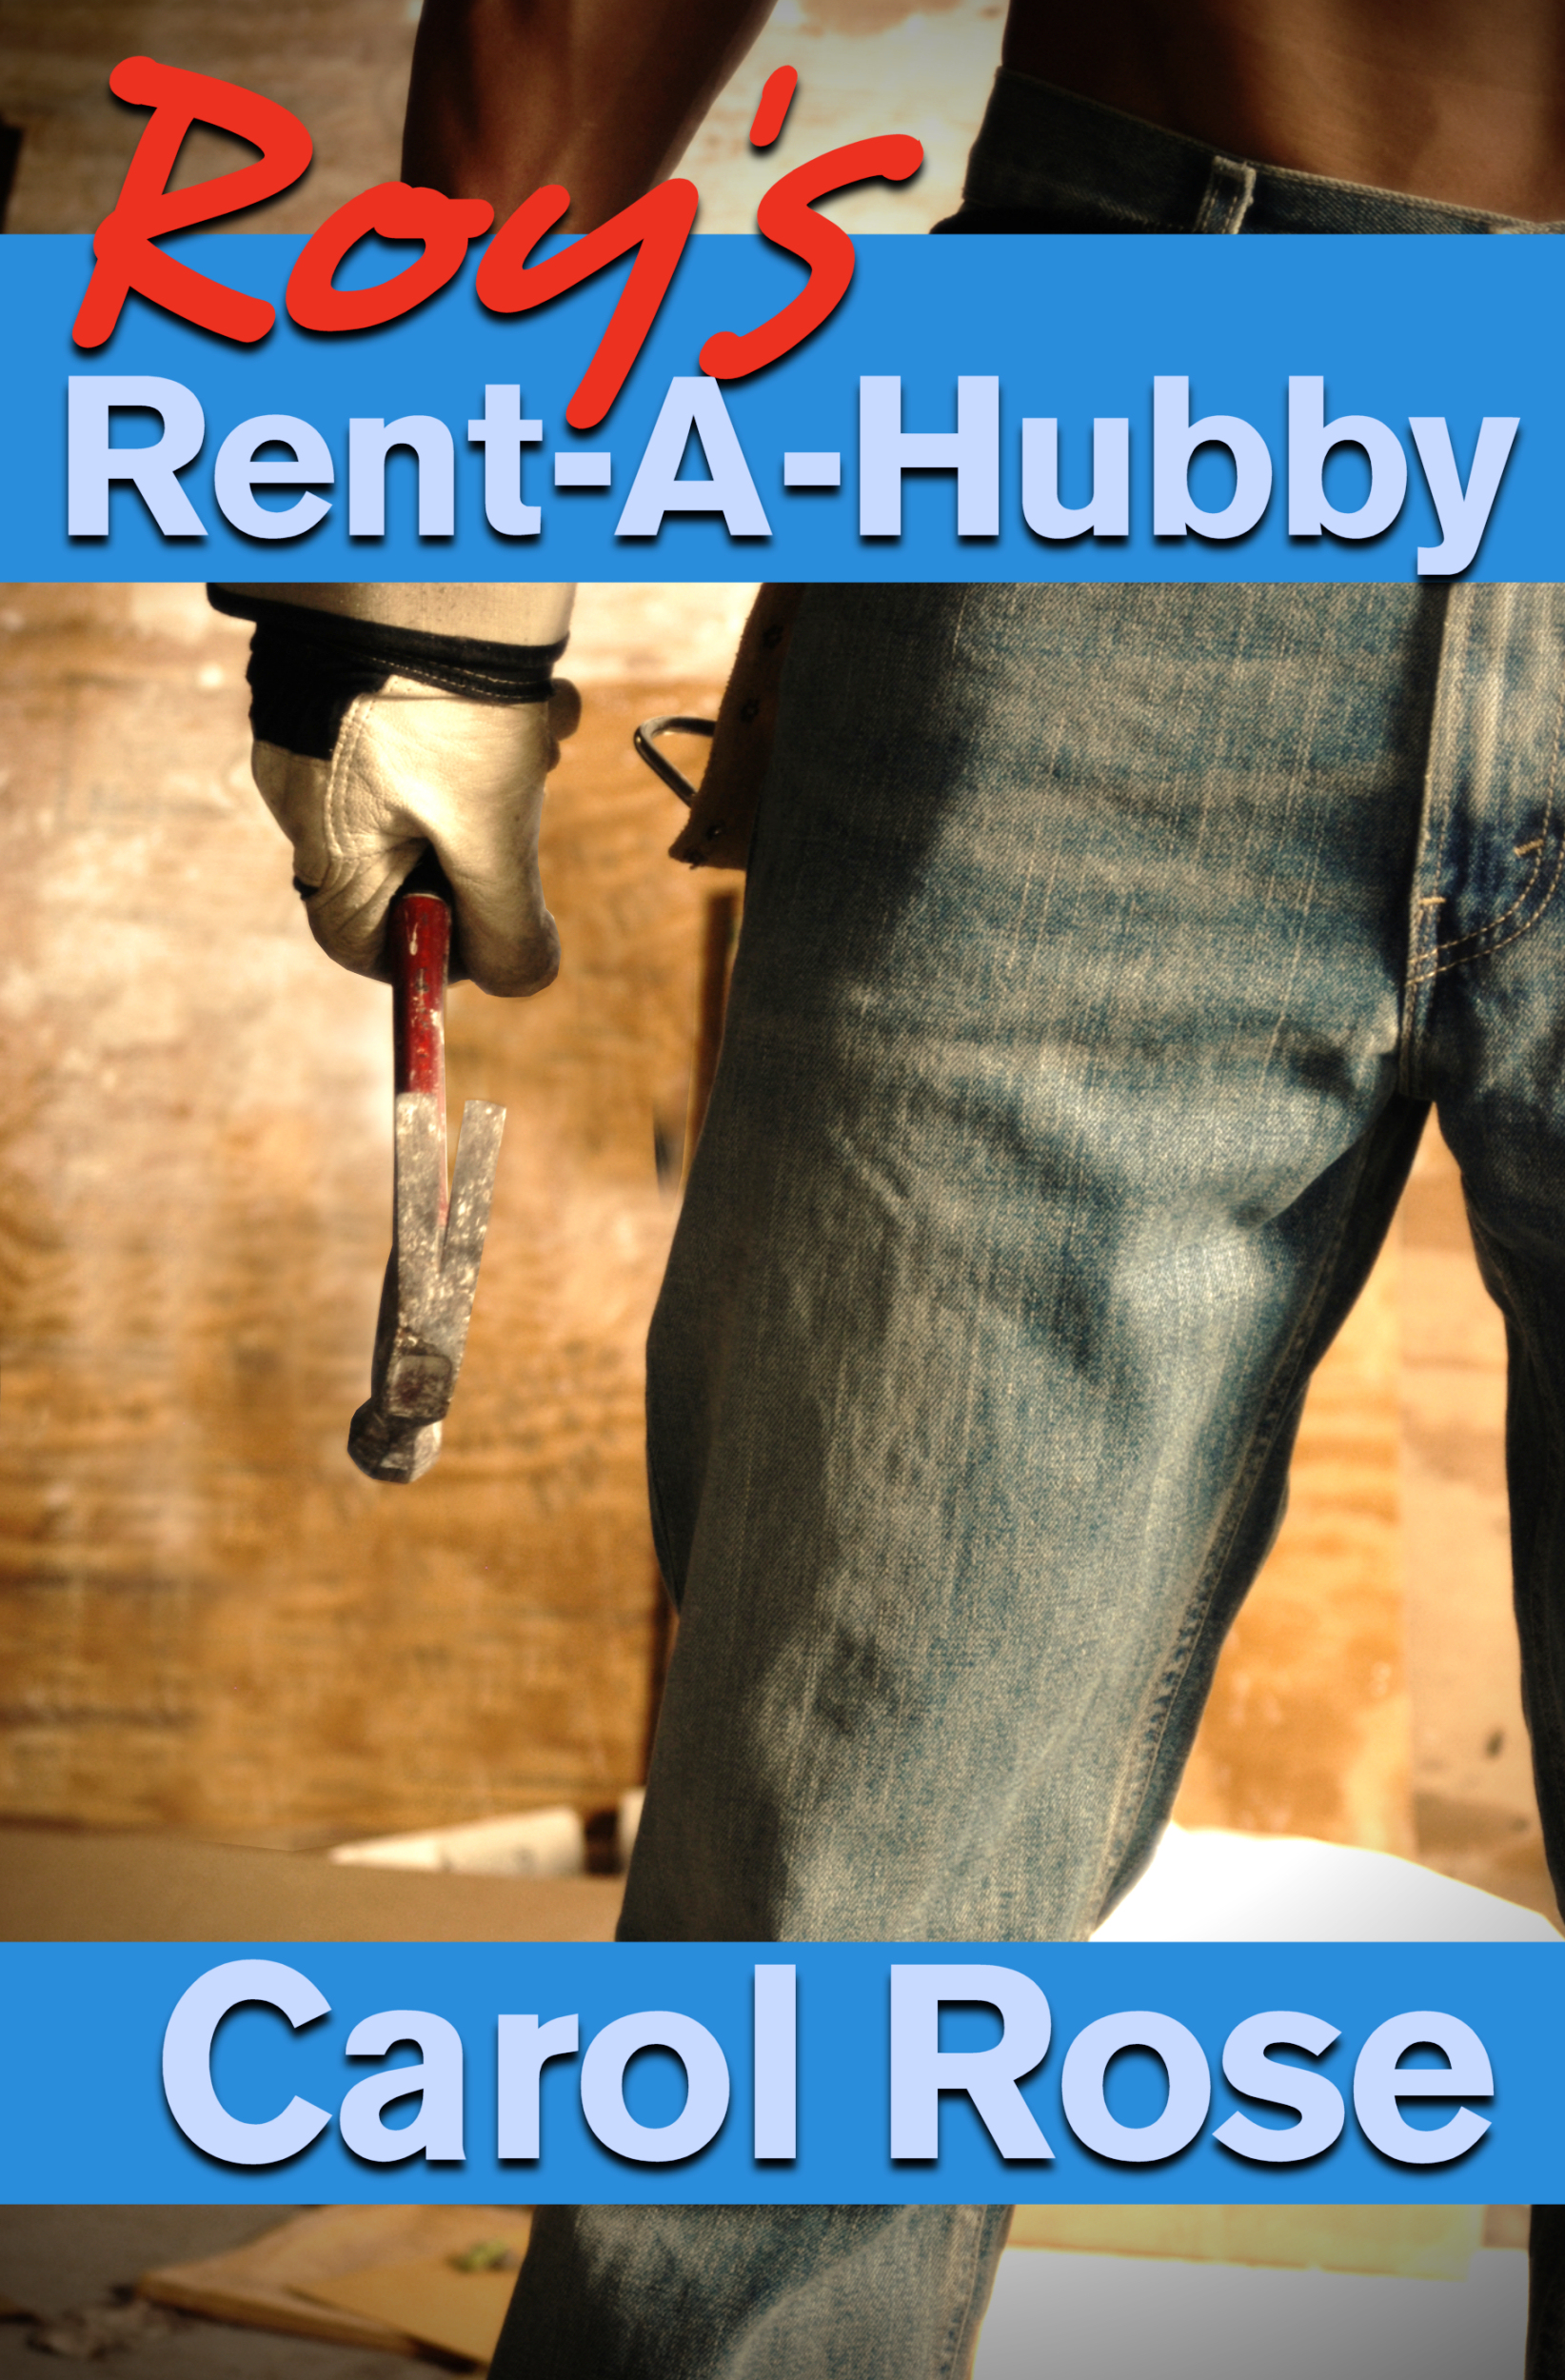 ROYS-RENT-A-HUBBY-2-2500